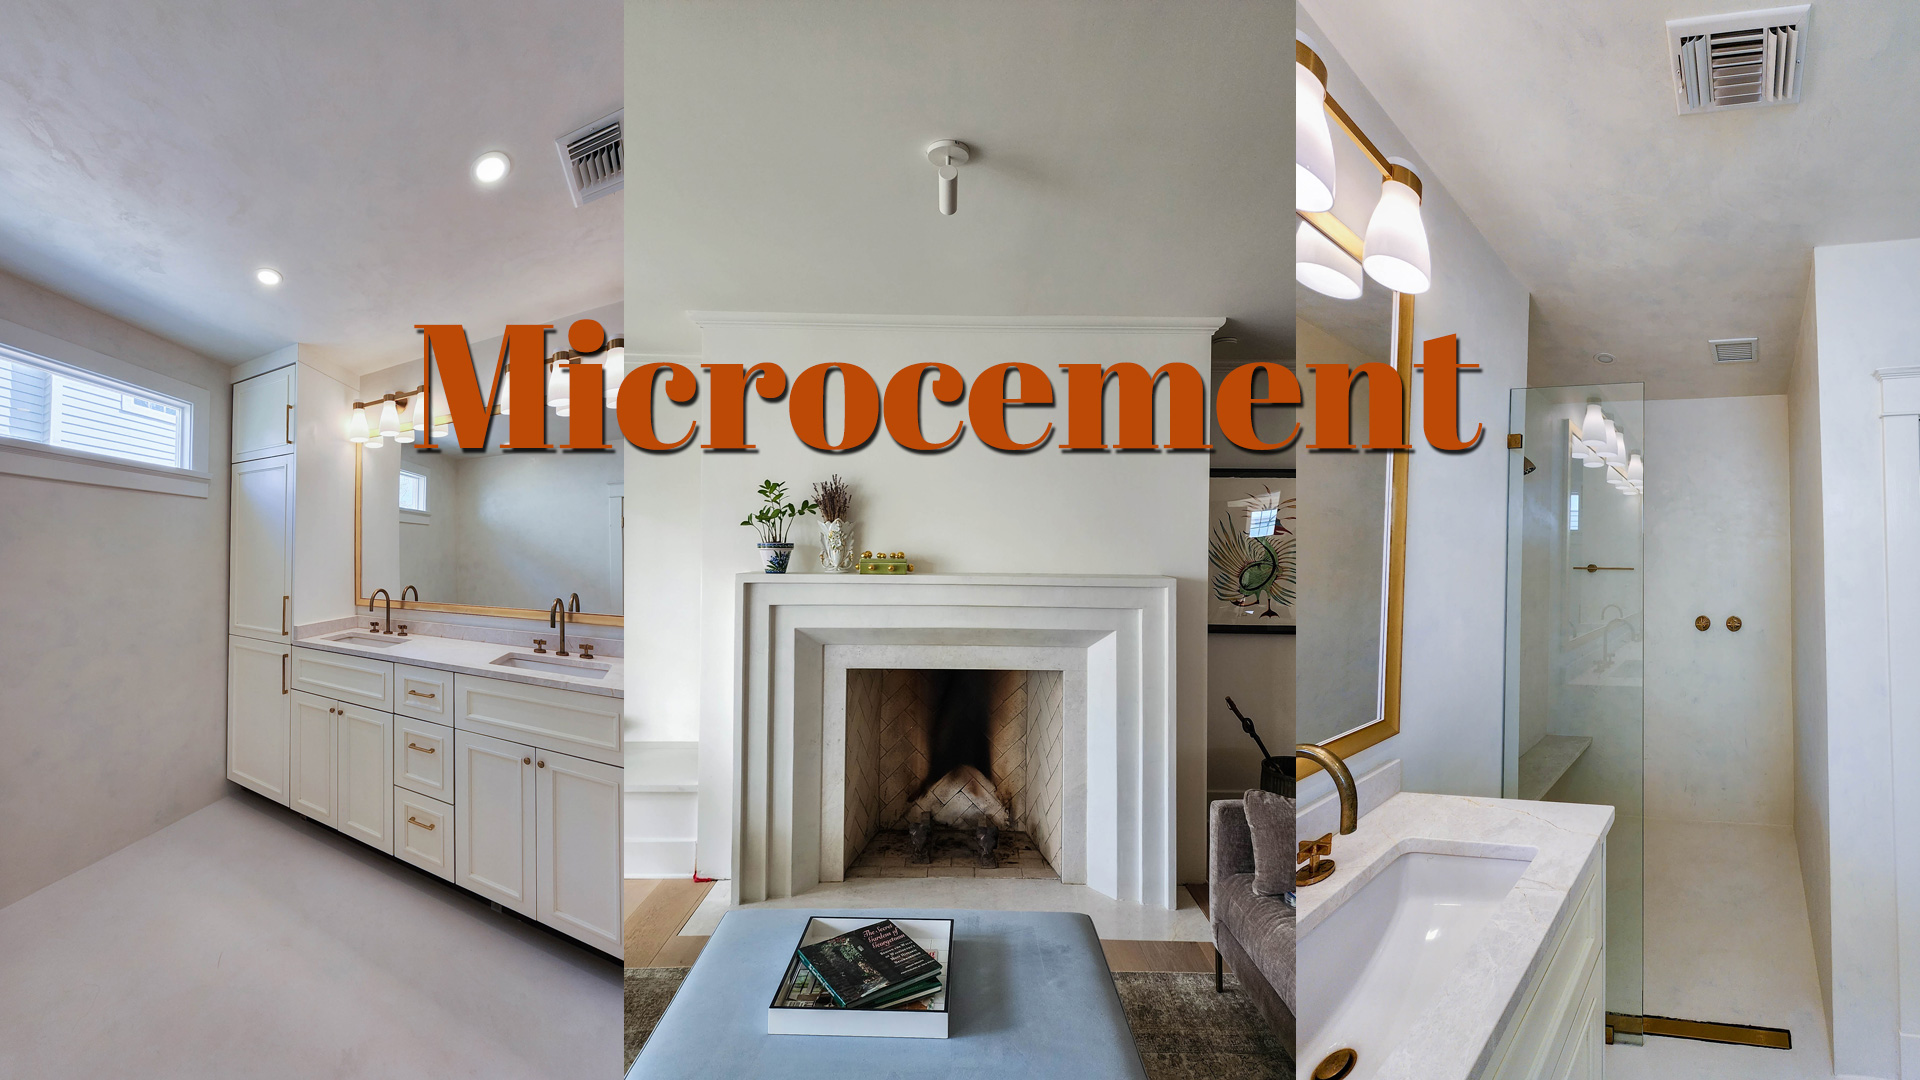 Sylvia T Designs and Gulf Coast Plaster Artisans is the leading microcement applicator and distributor in New Orleans, Baton Rouge, and the Gulf South. Servicing Louisiana, Mississippi, Alabama, and the Florida Panhandle. 